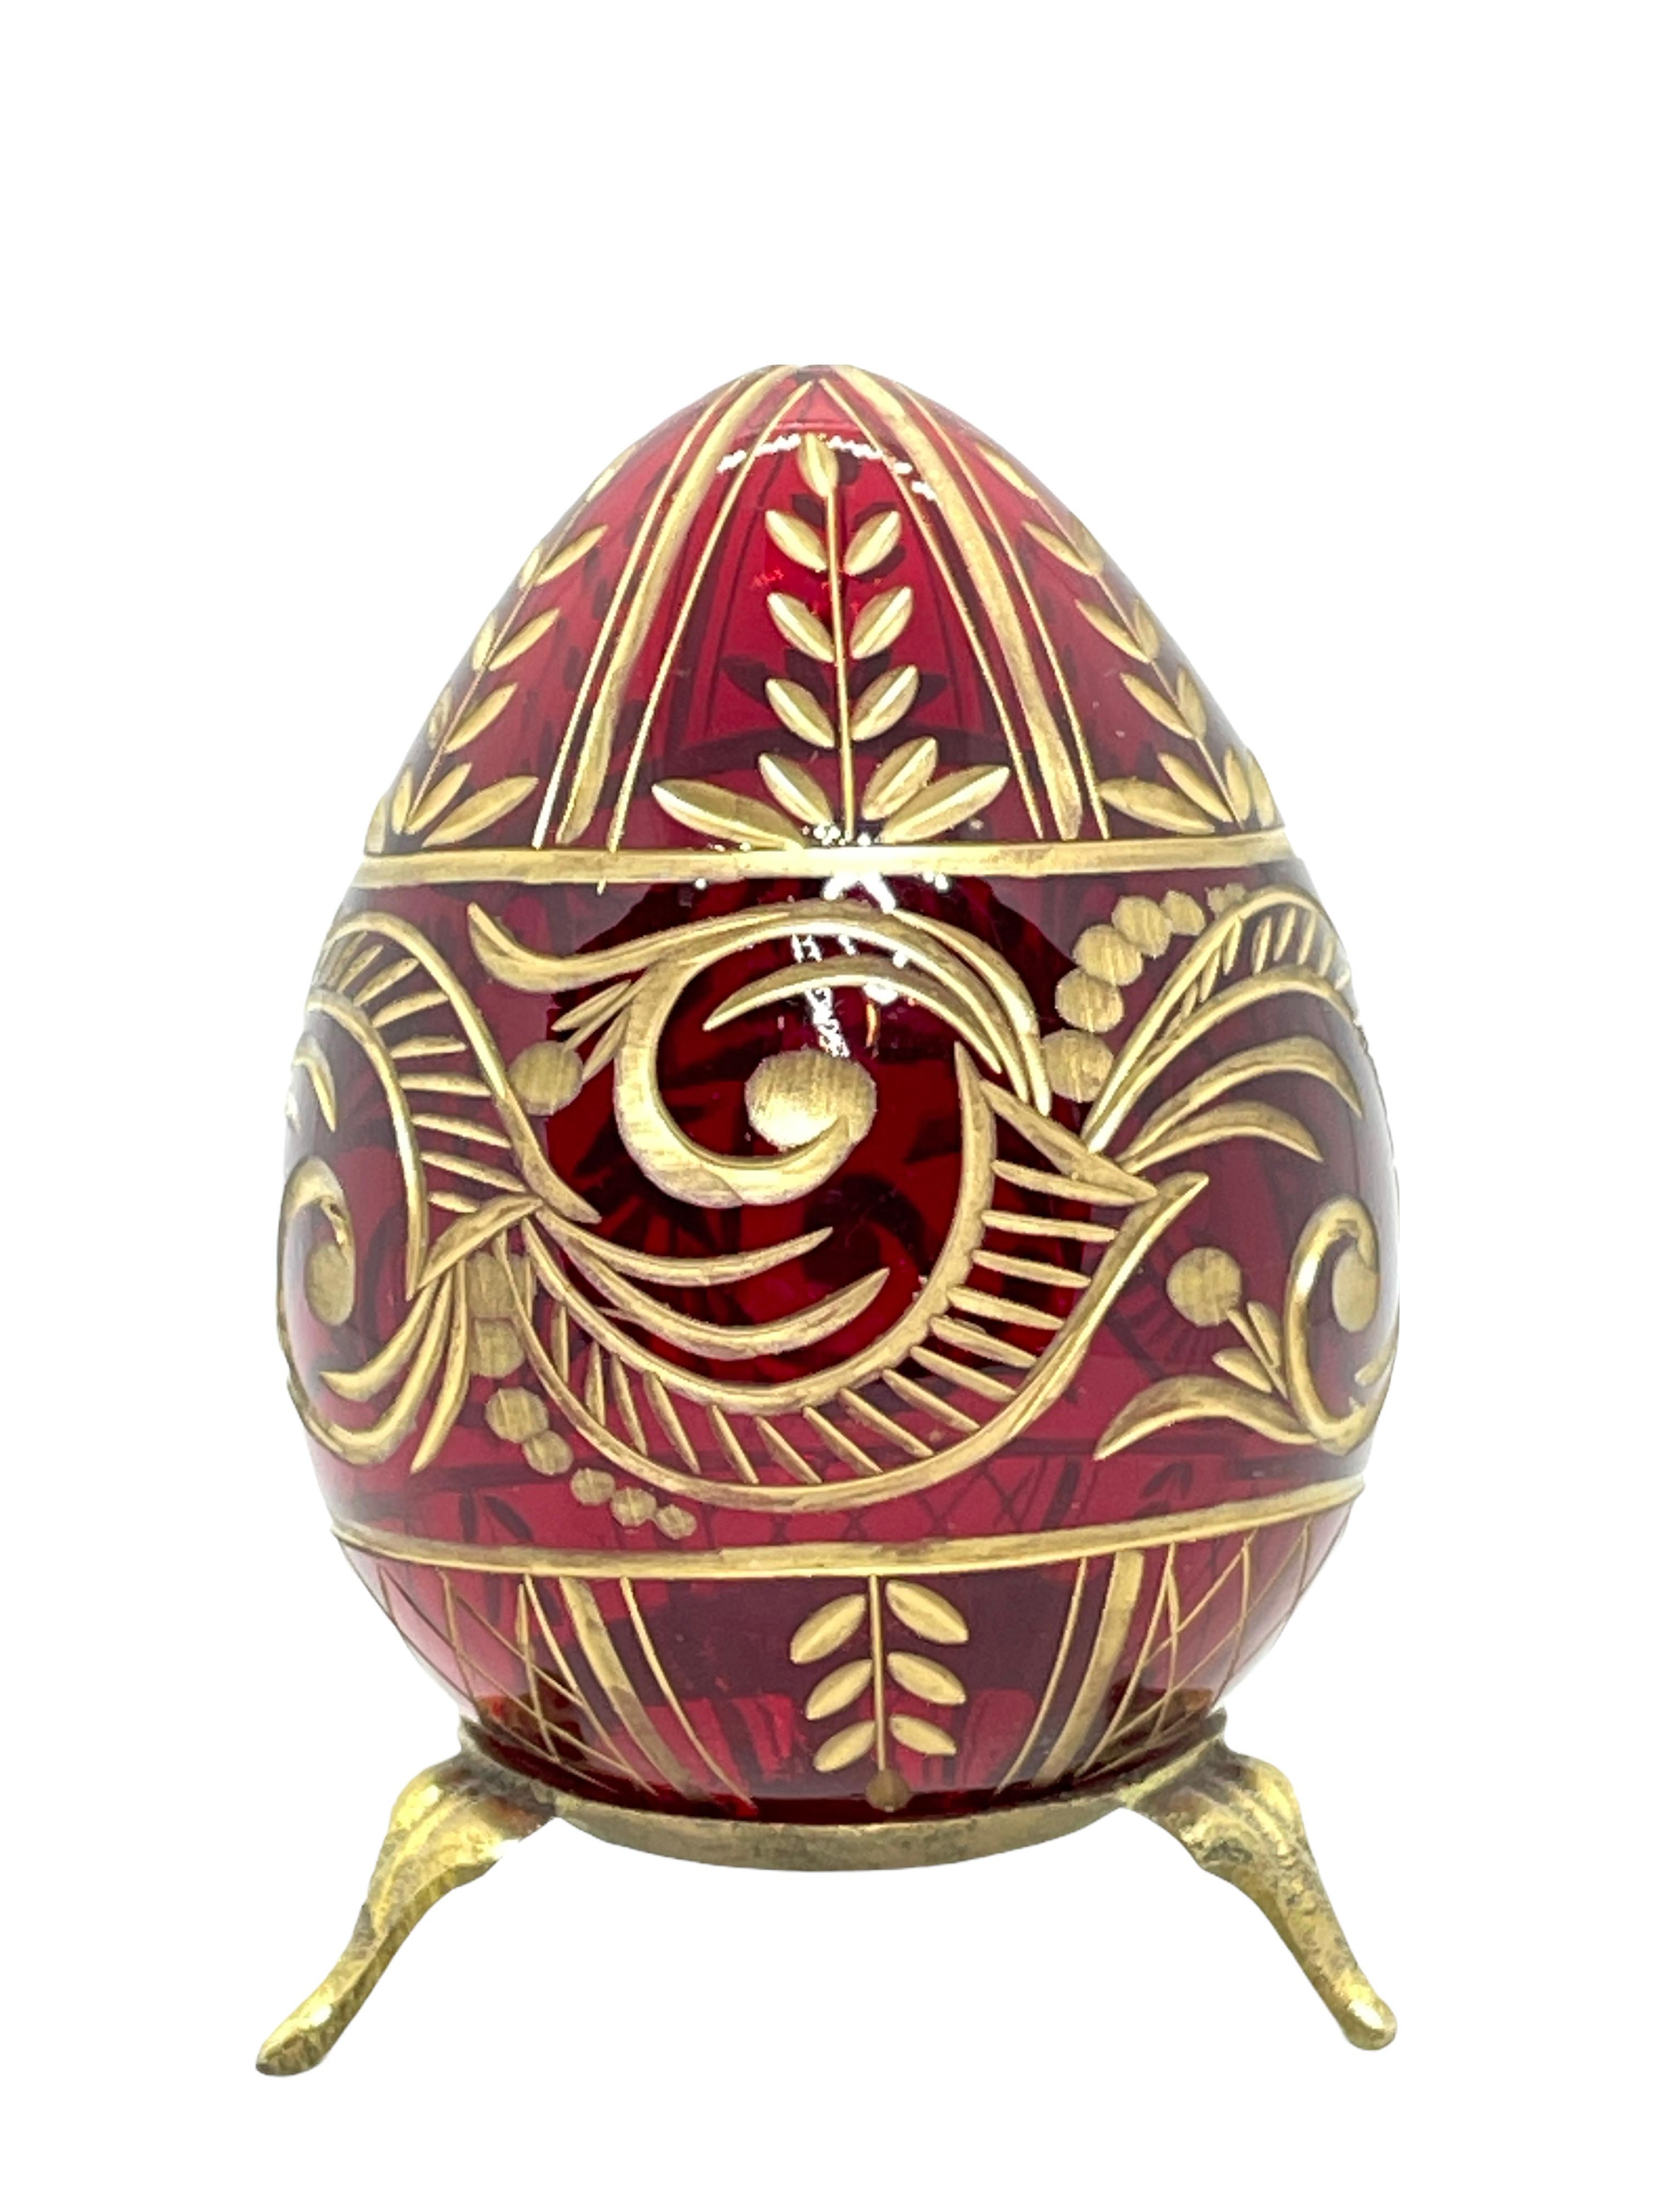 Vintage Faberge Russia style glass egg with etched decorations. Reminiscent of eggs from St. Petersburg. Measures: 2.13